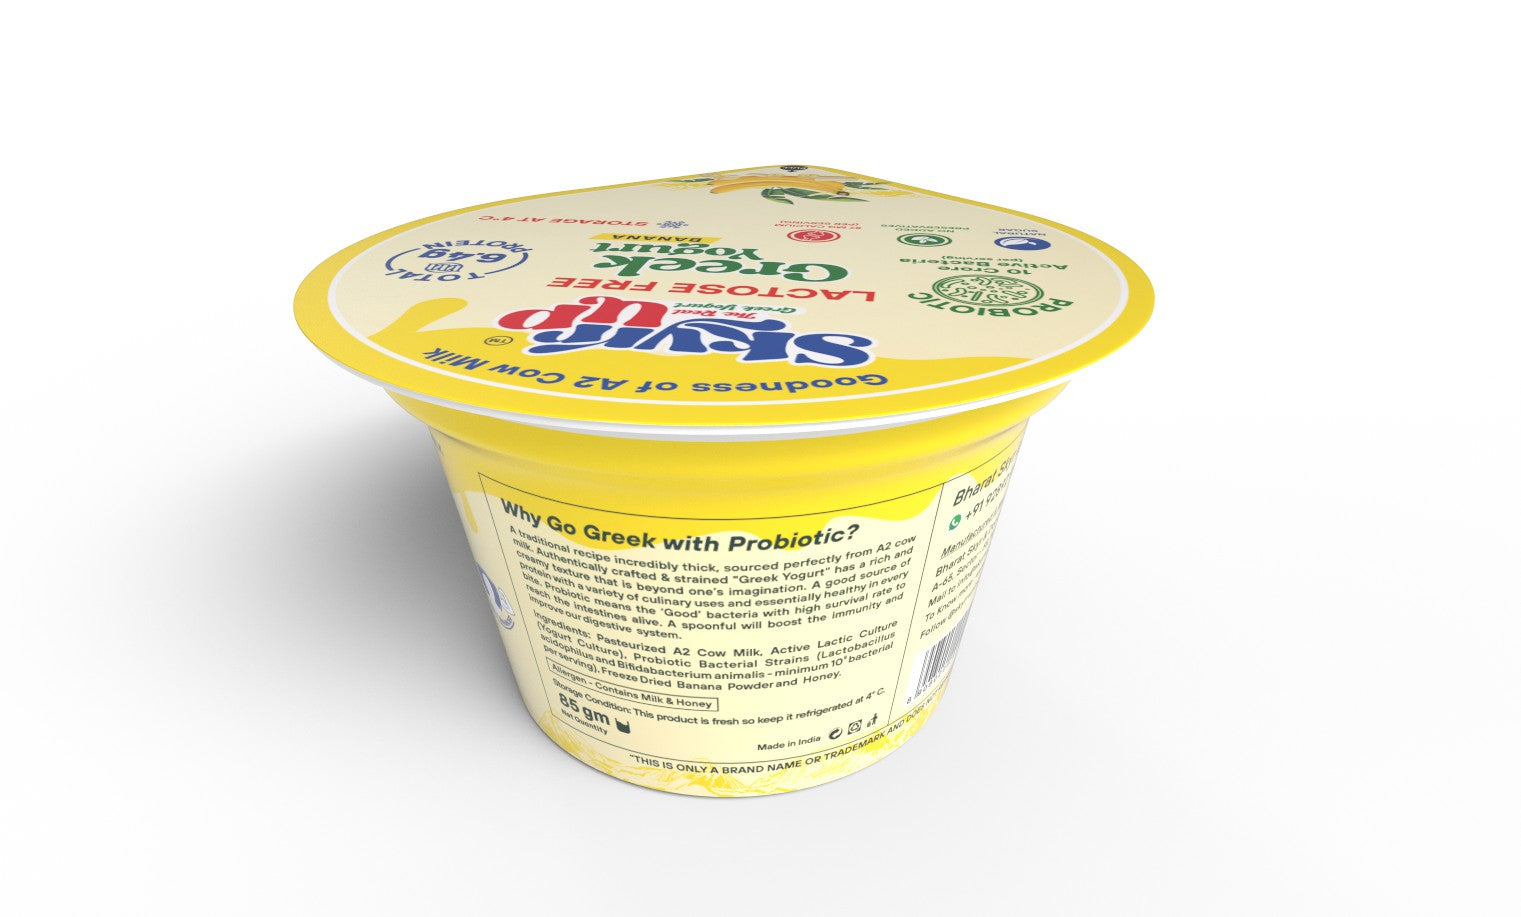 Greek Yogurt - 85gm - Banana (Made From A2 Cow Milk) - Probiotic, 6.4gm Protein, Zero Preservatives, Lactose Free-Pack of 6